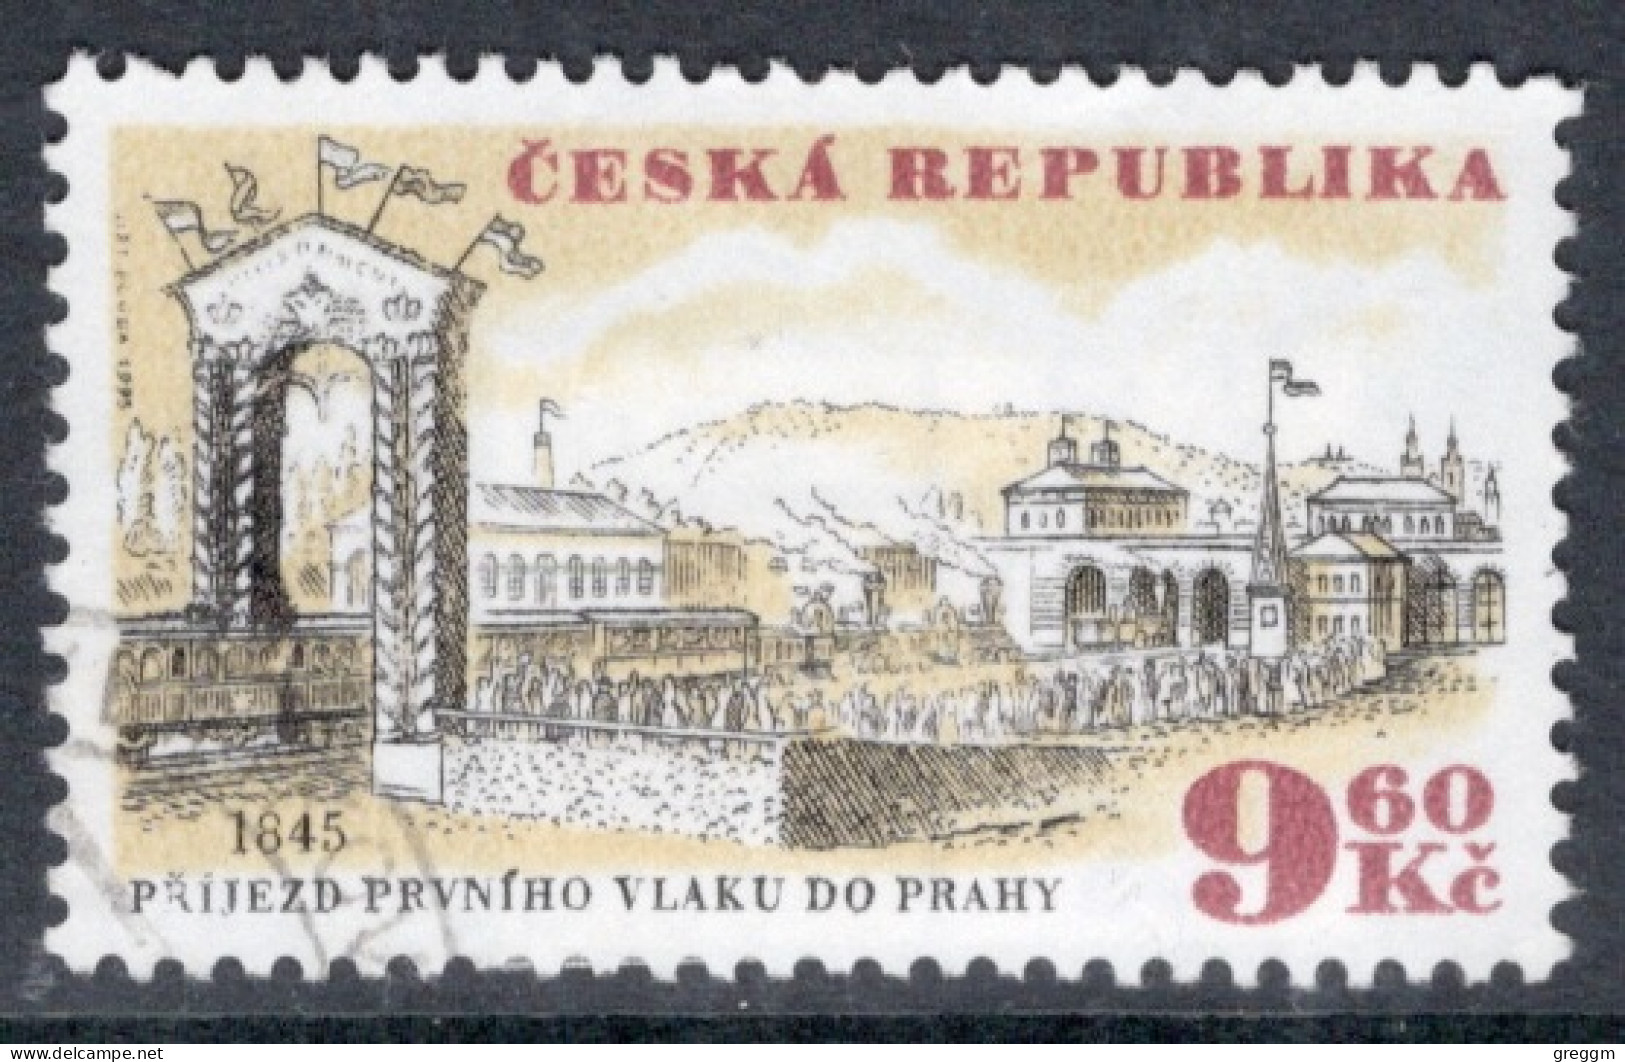 Czech Republic 1995 Single Stamp For The 150th Anniversary Of The Railway Connection Olomouc-Prague In Fine Used - Used Stamps